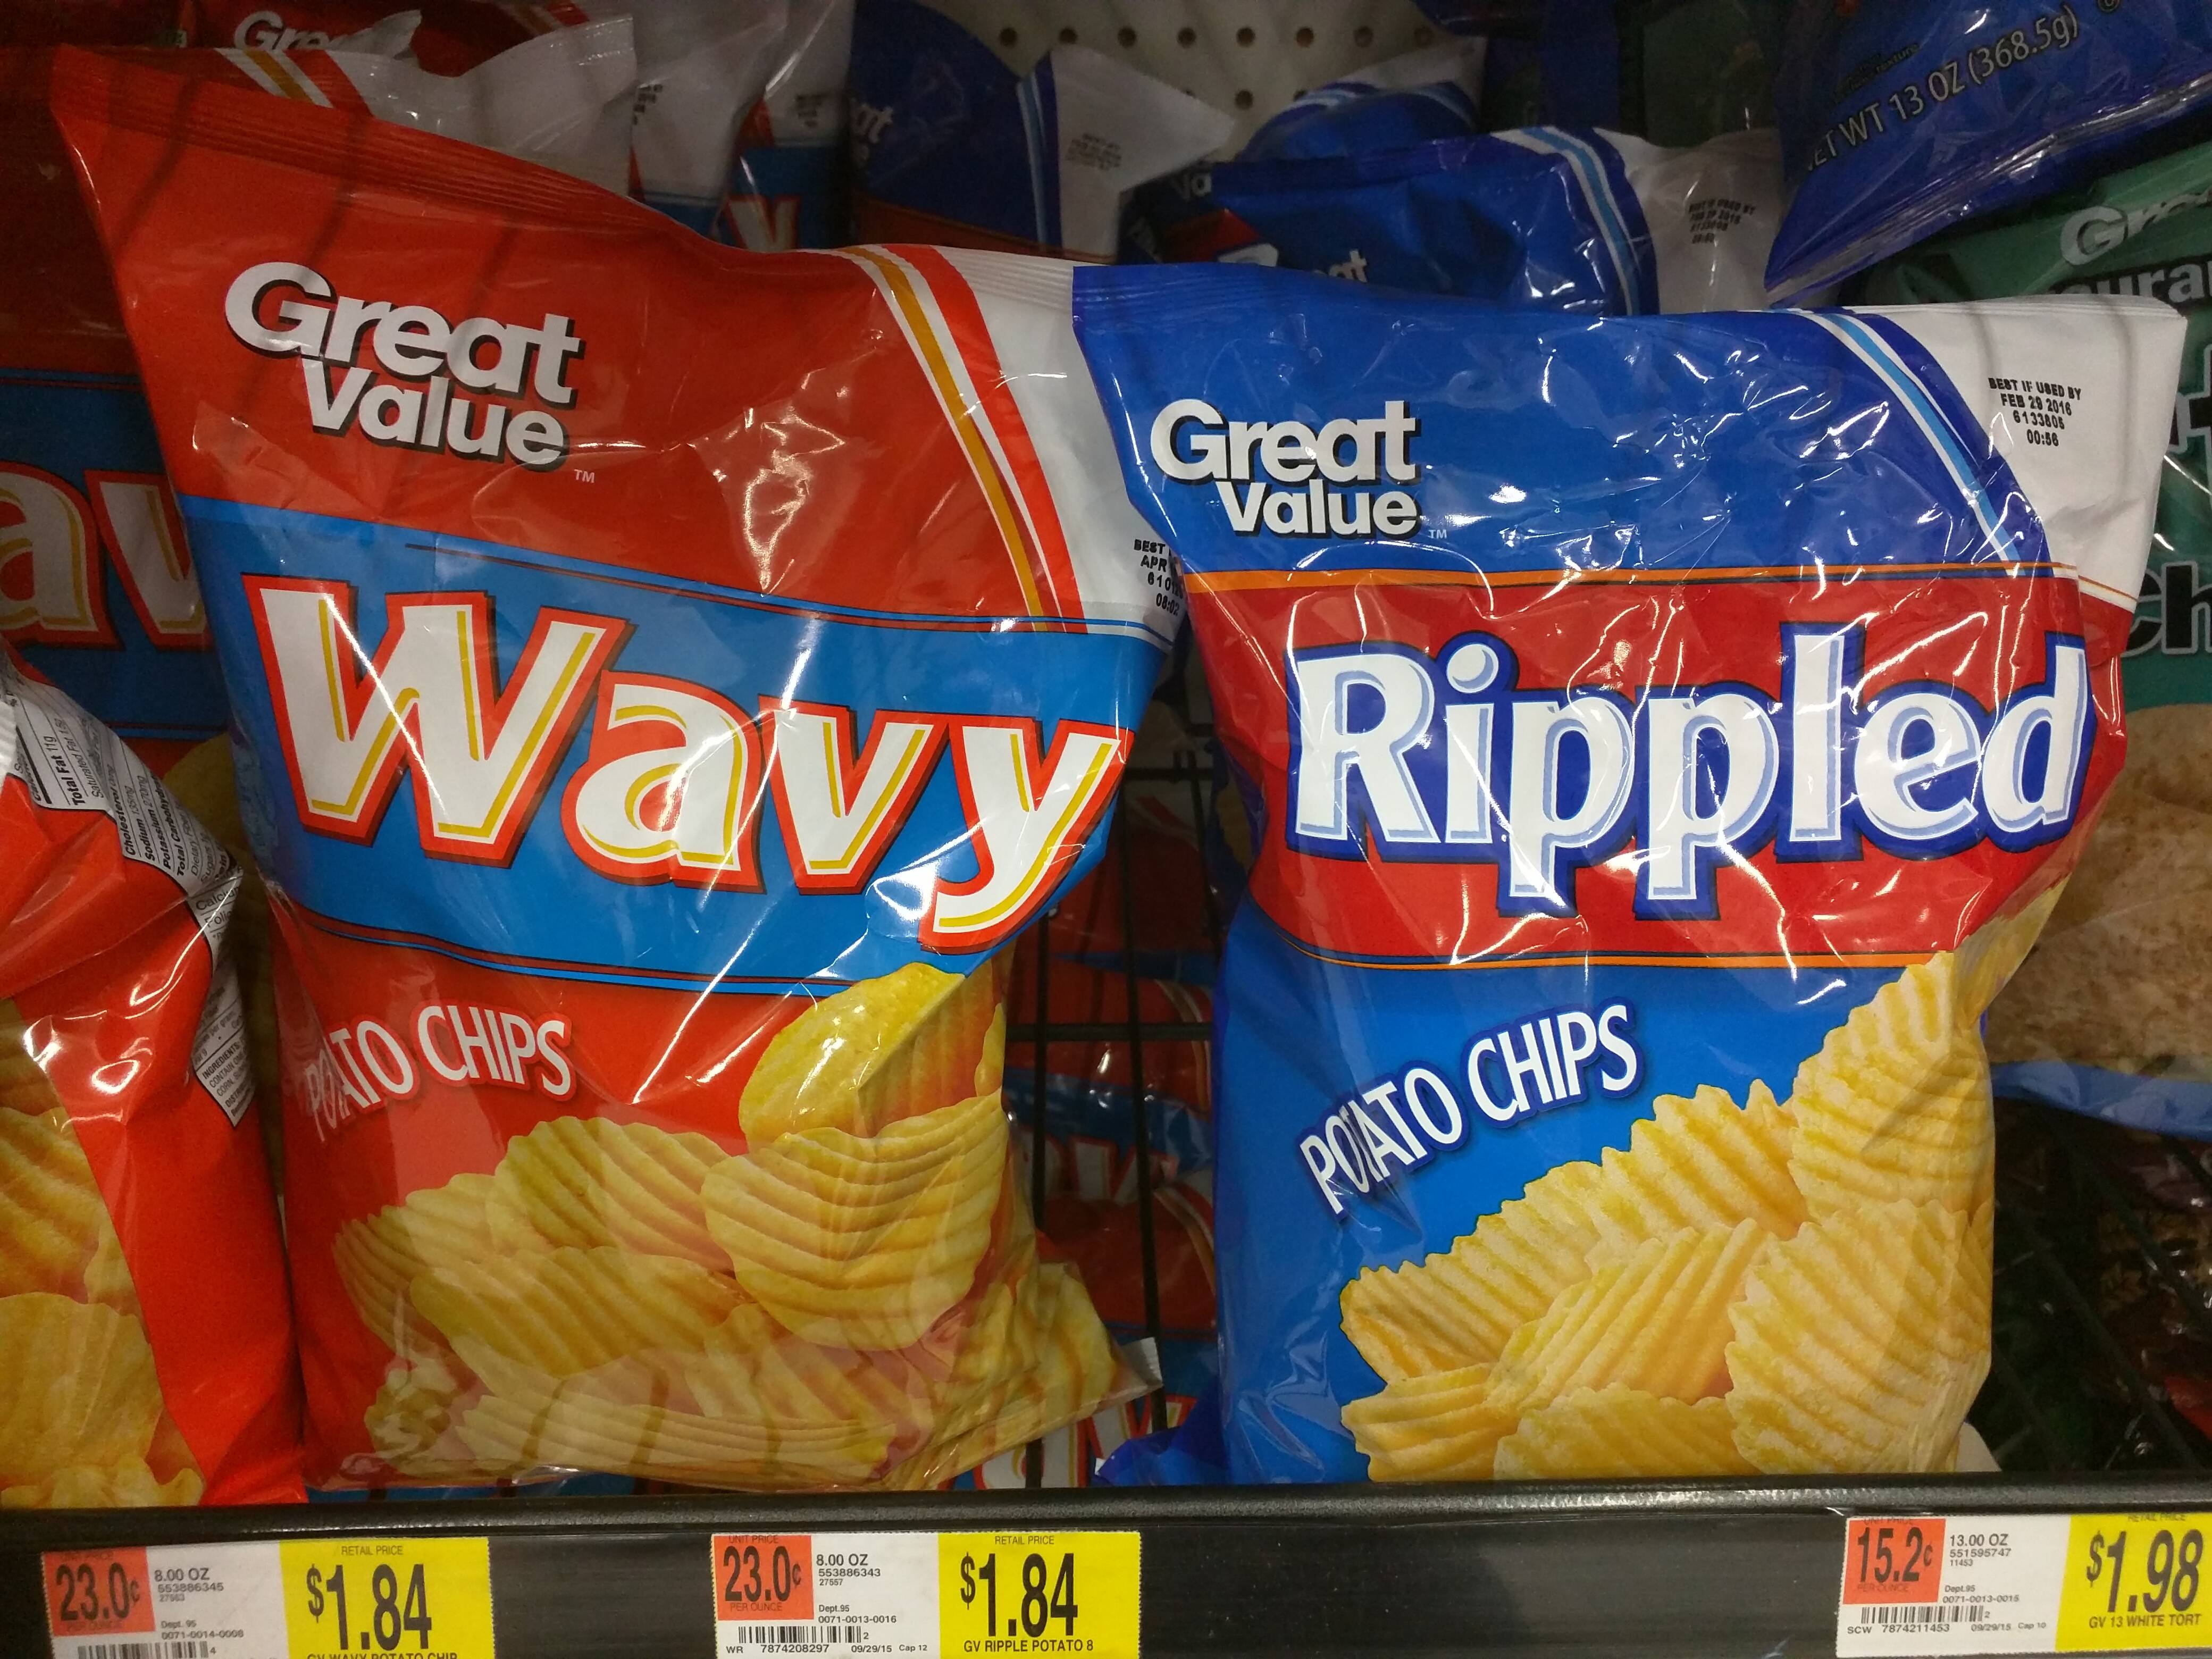 wavy and rippled chips - 13021368.50 Y Son areol Value Wavy Rippled To Chips Potato Chips 23. 0 23.0 15.2 1.84 $1.84 51.98 Te